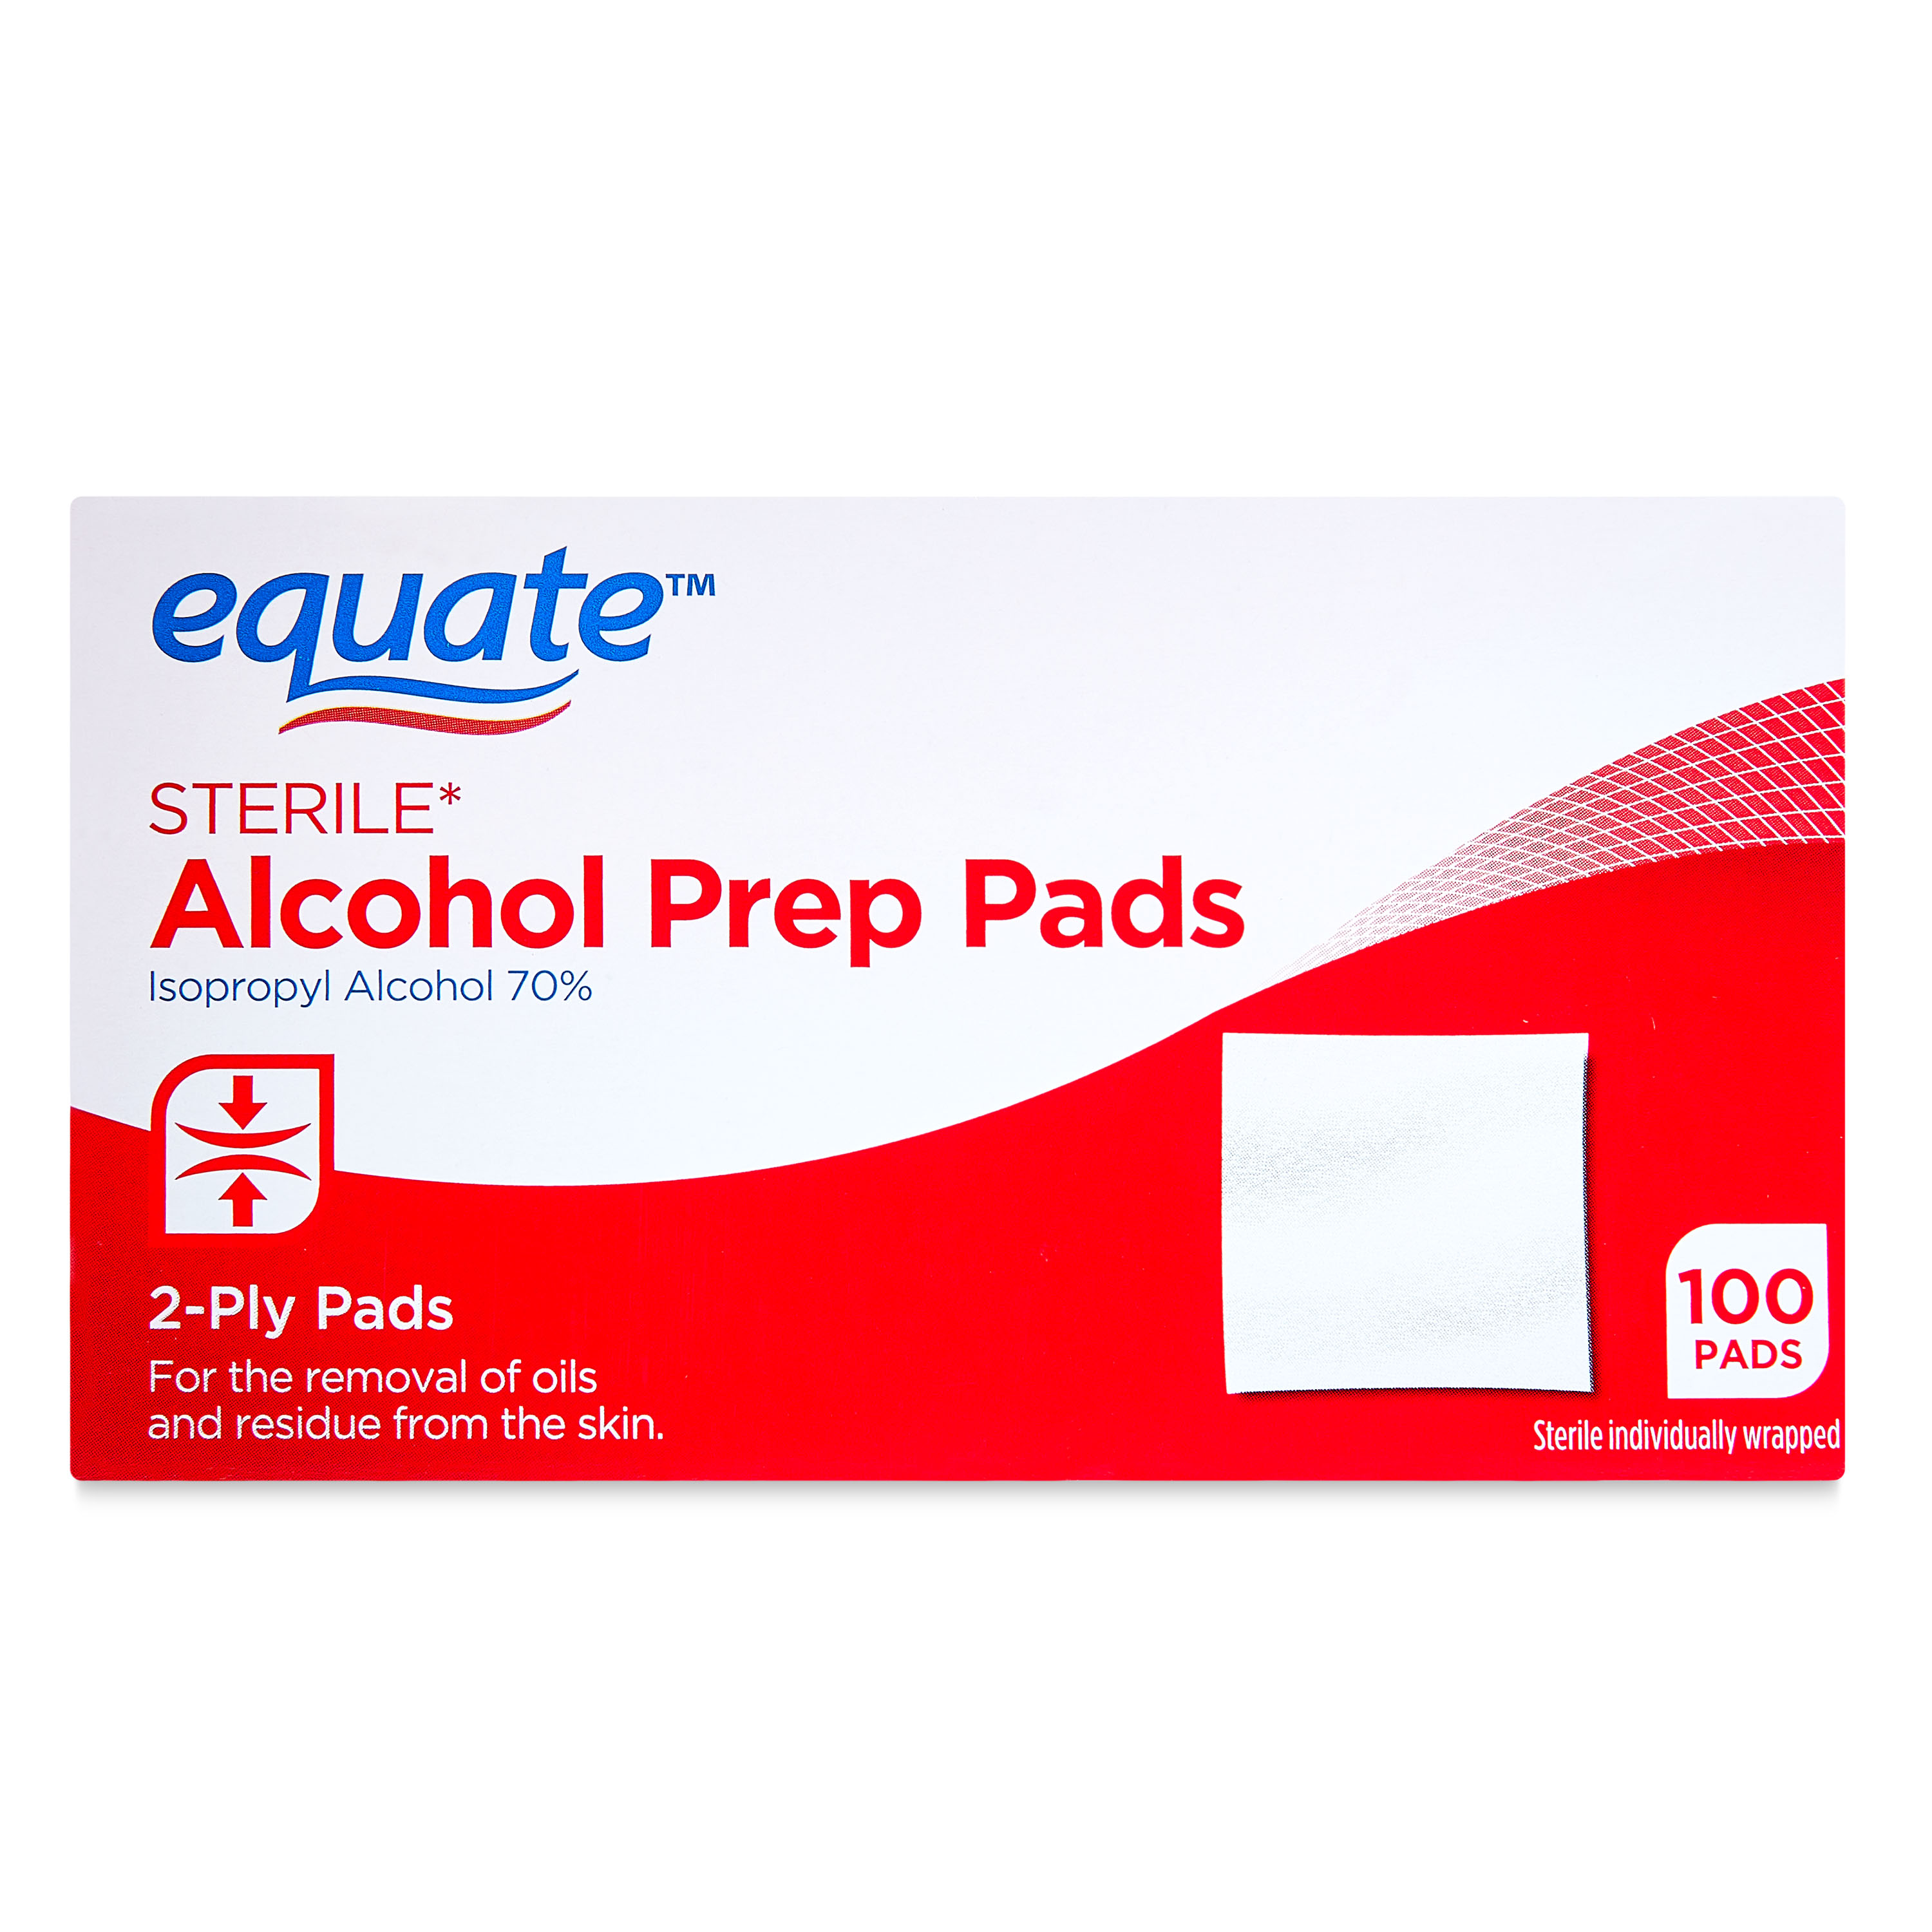 Equate Sterile Alcohol Prep Pads, 100 Count - image 1 of 8